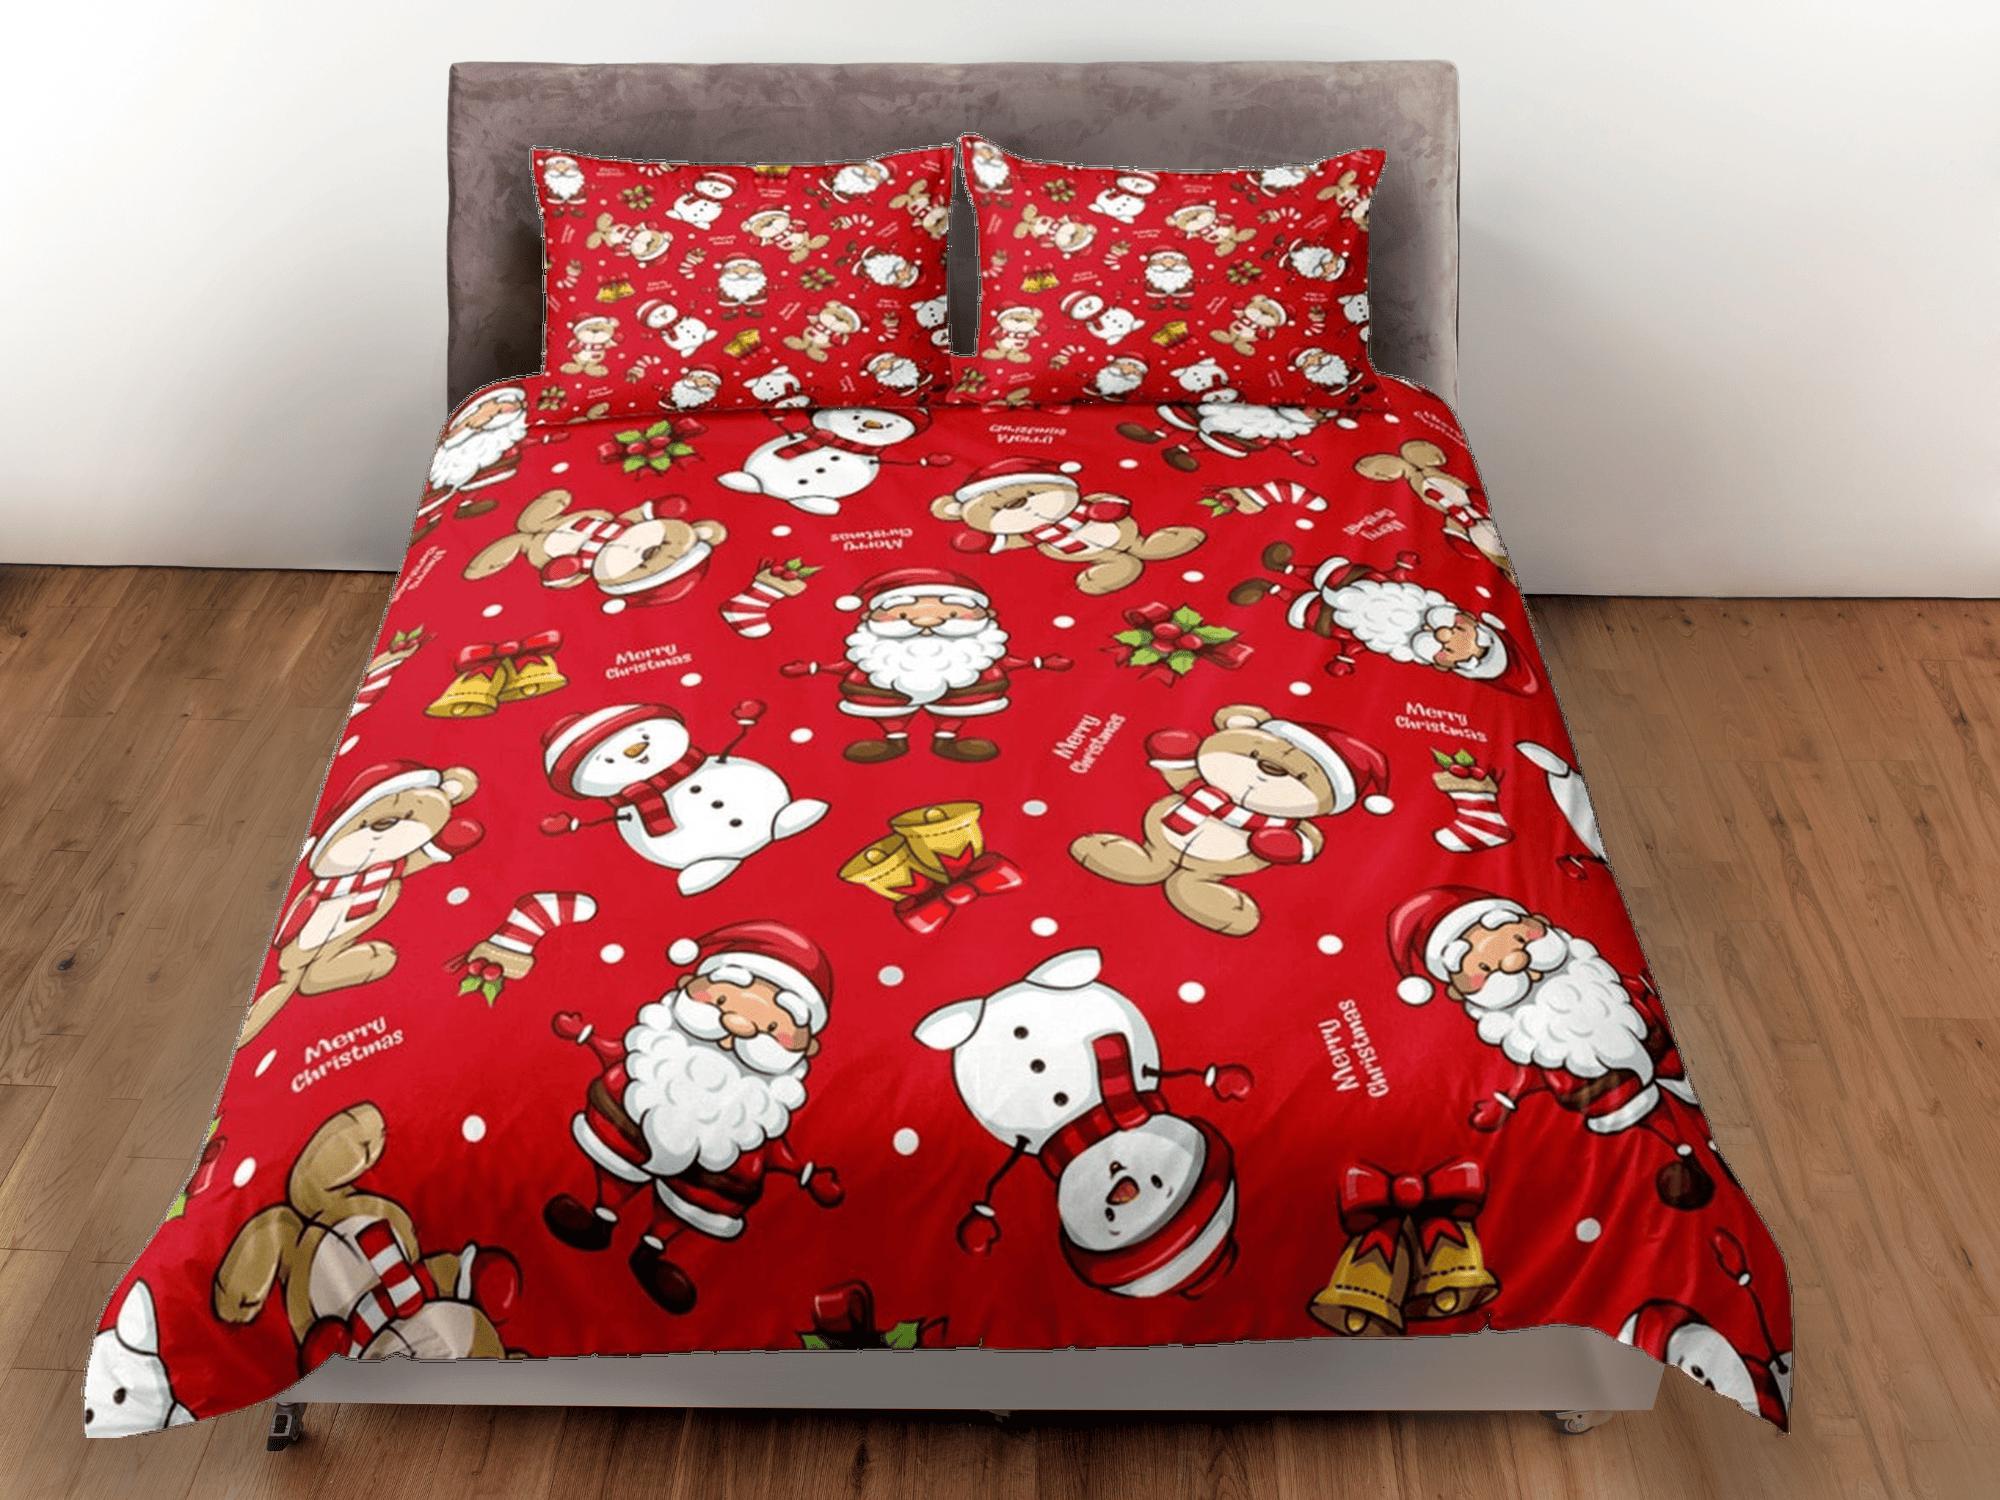 daintyduvet Teddy bear and santa claus red duvet cover set, christmas full size bedding & pillowcase, college bedding, toddler bedding, holiday gift